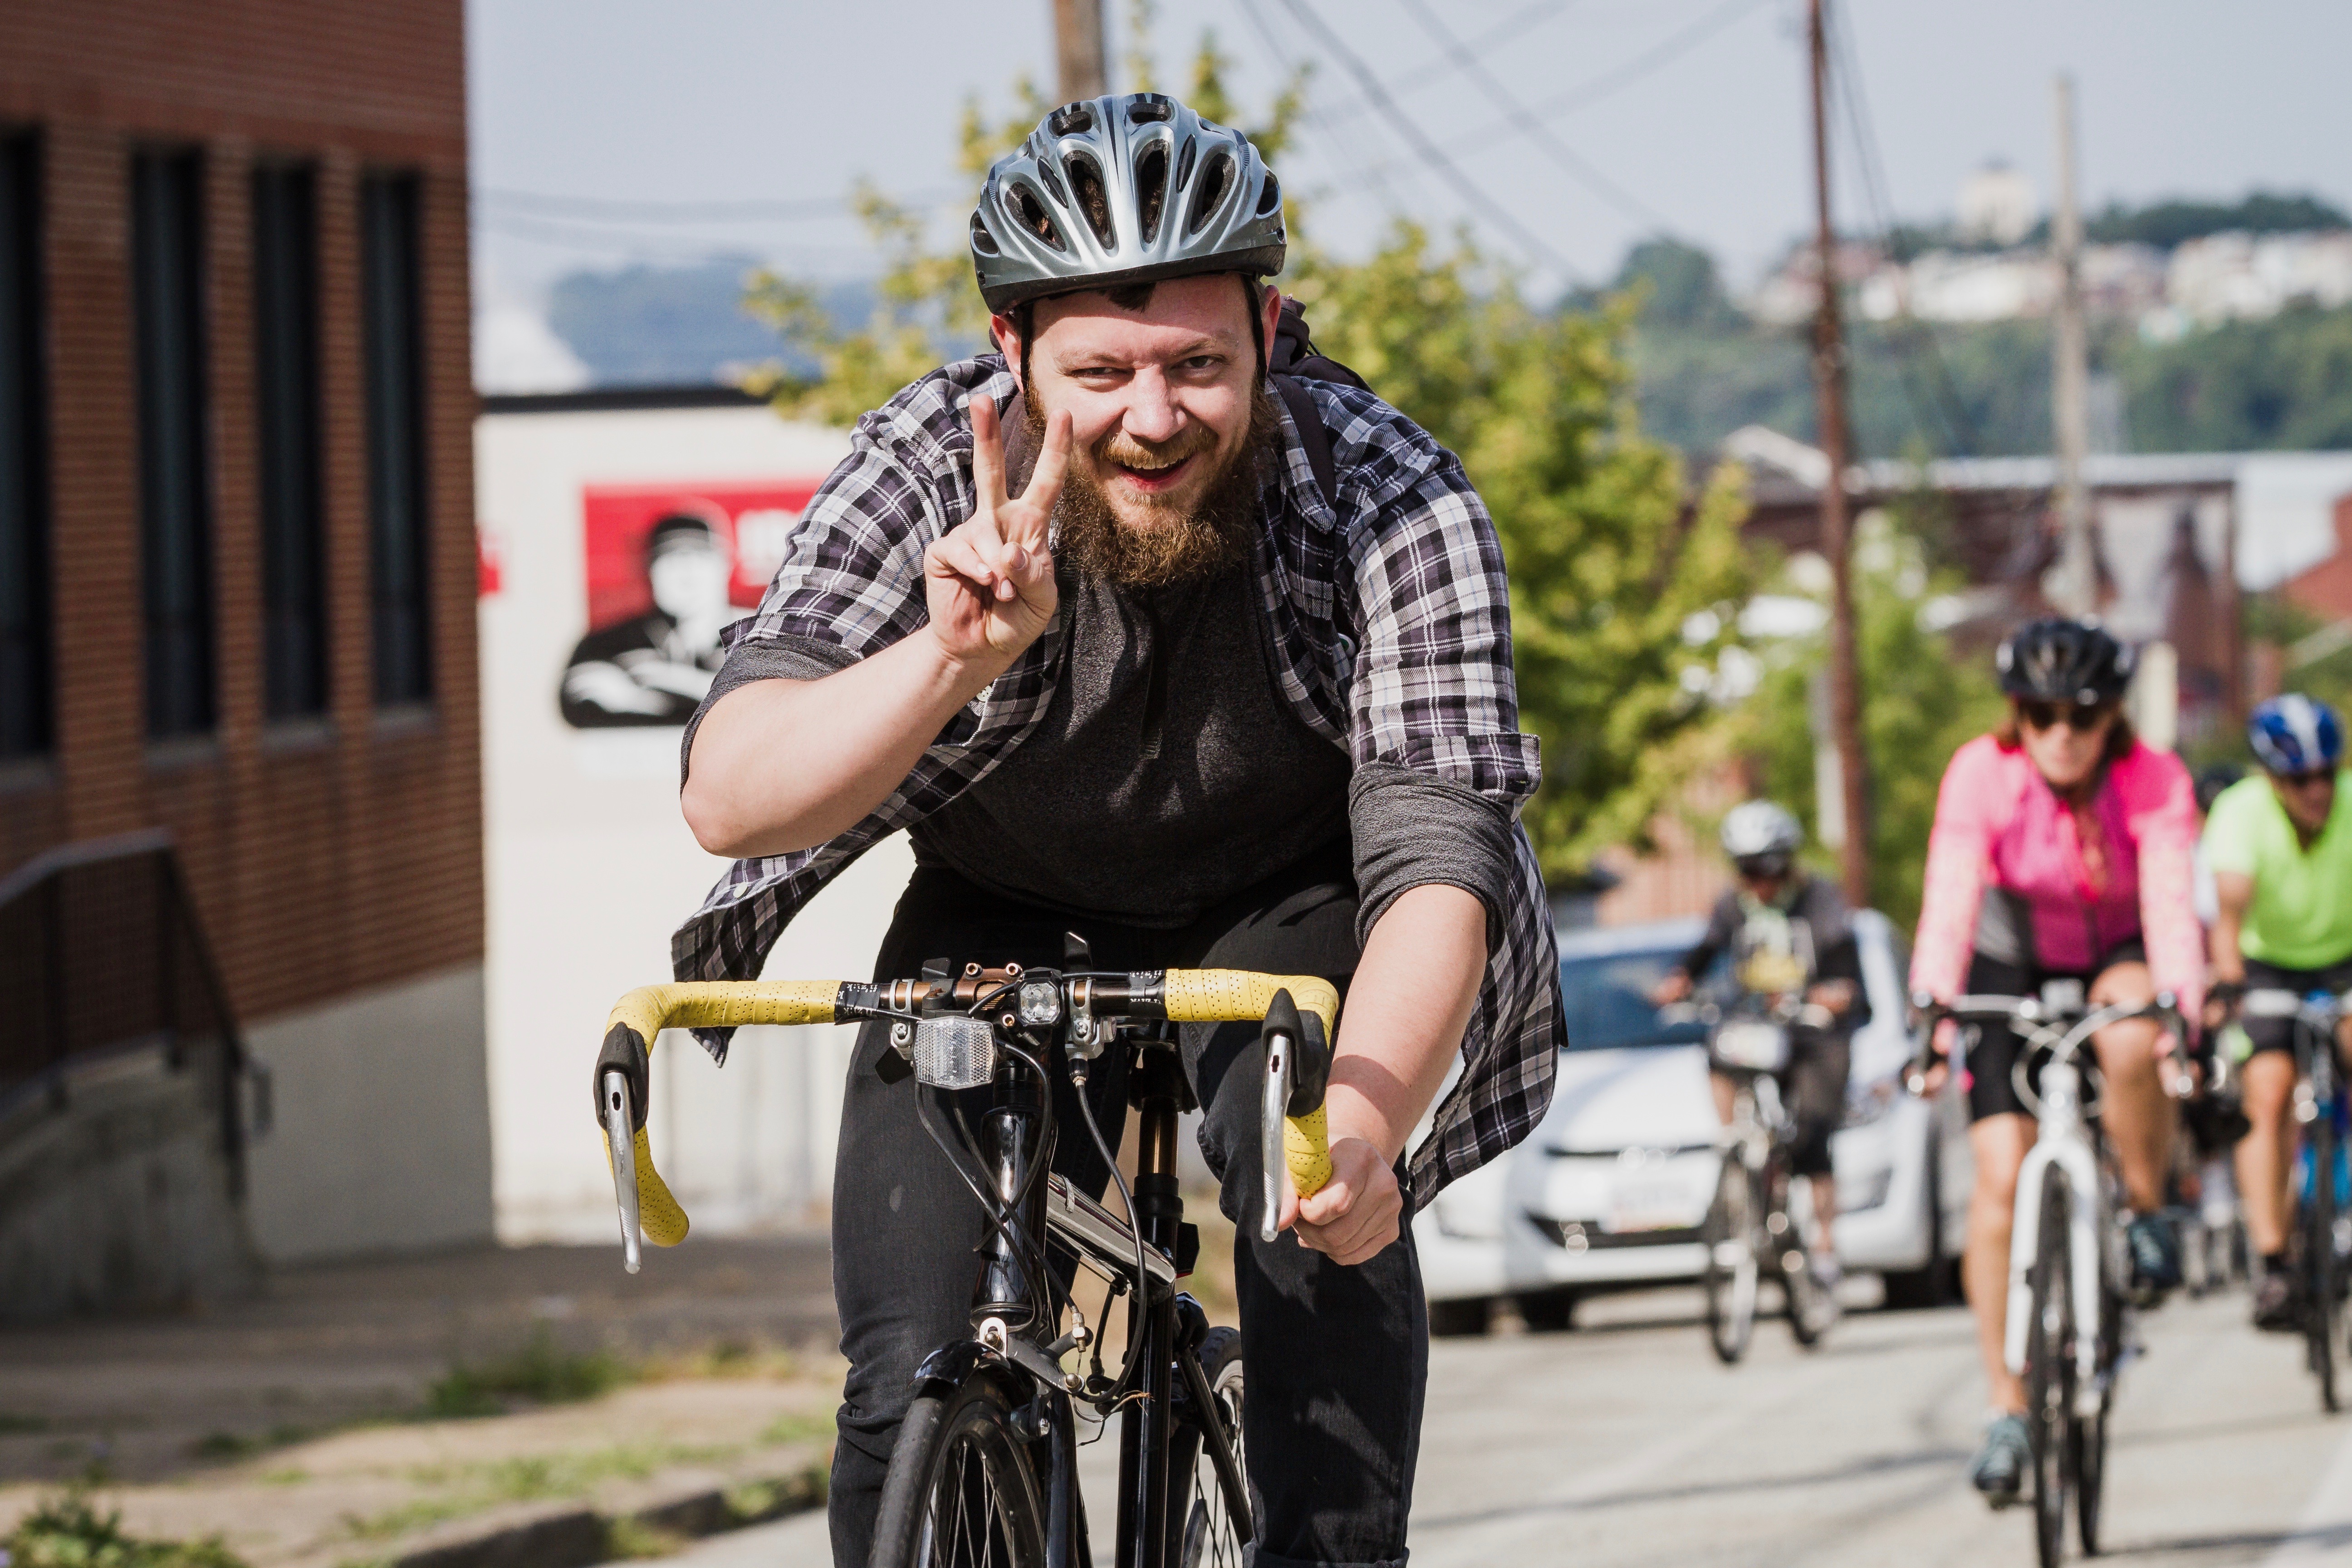 As this gentleman illustrated, the 'peace' sign is a good sign to observe when cycling. (photo courtesy of BikePGH)